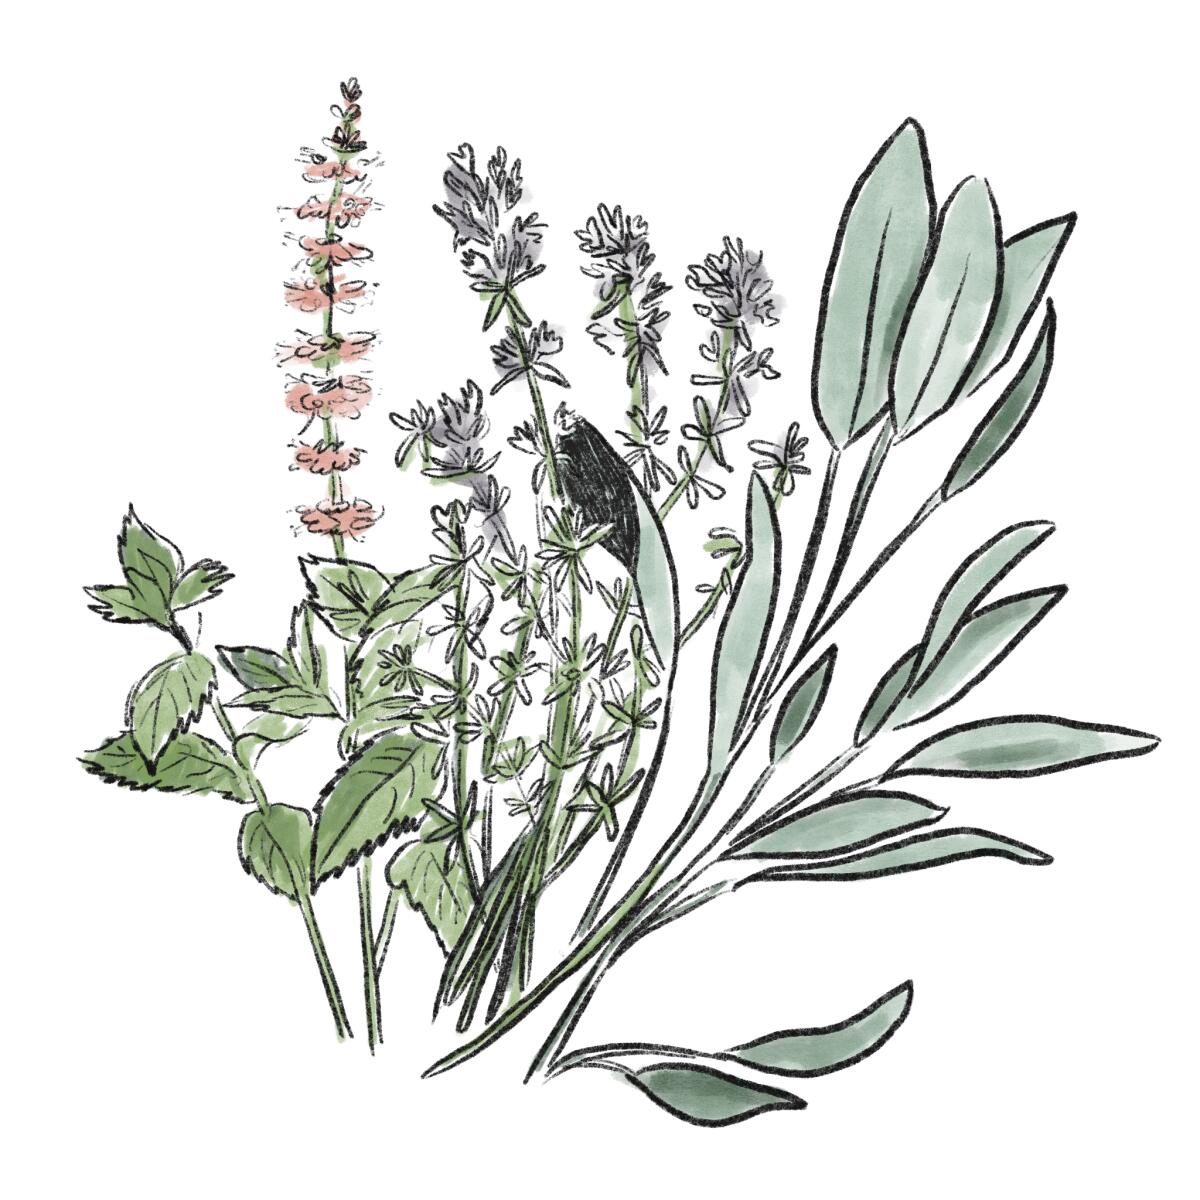 An illustration of sage, mint and thyme